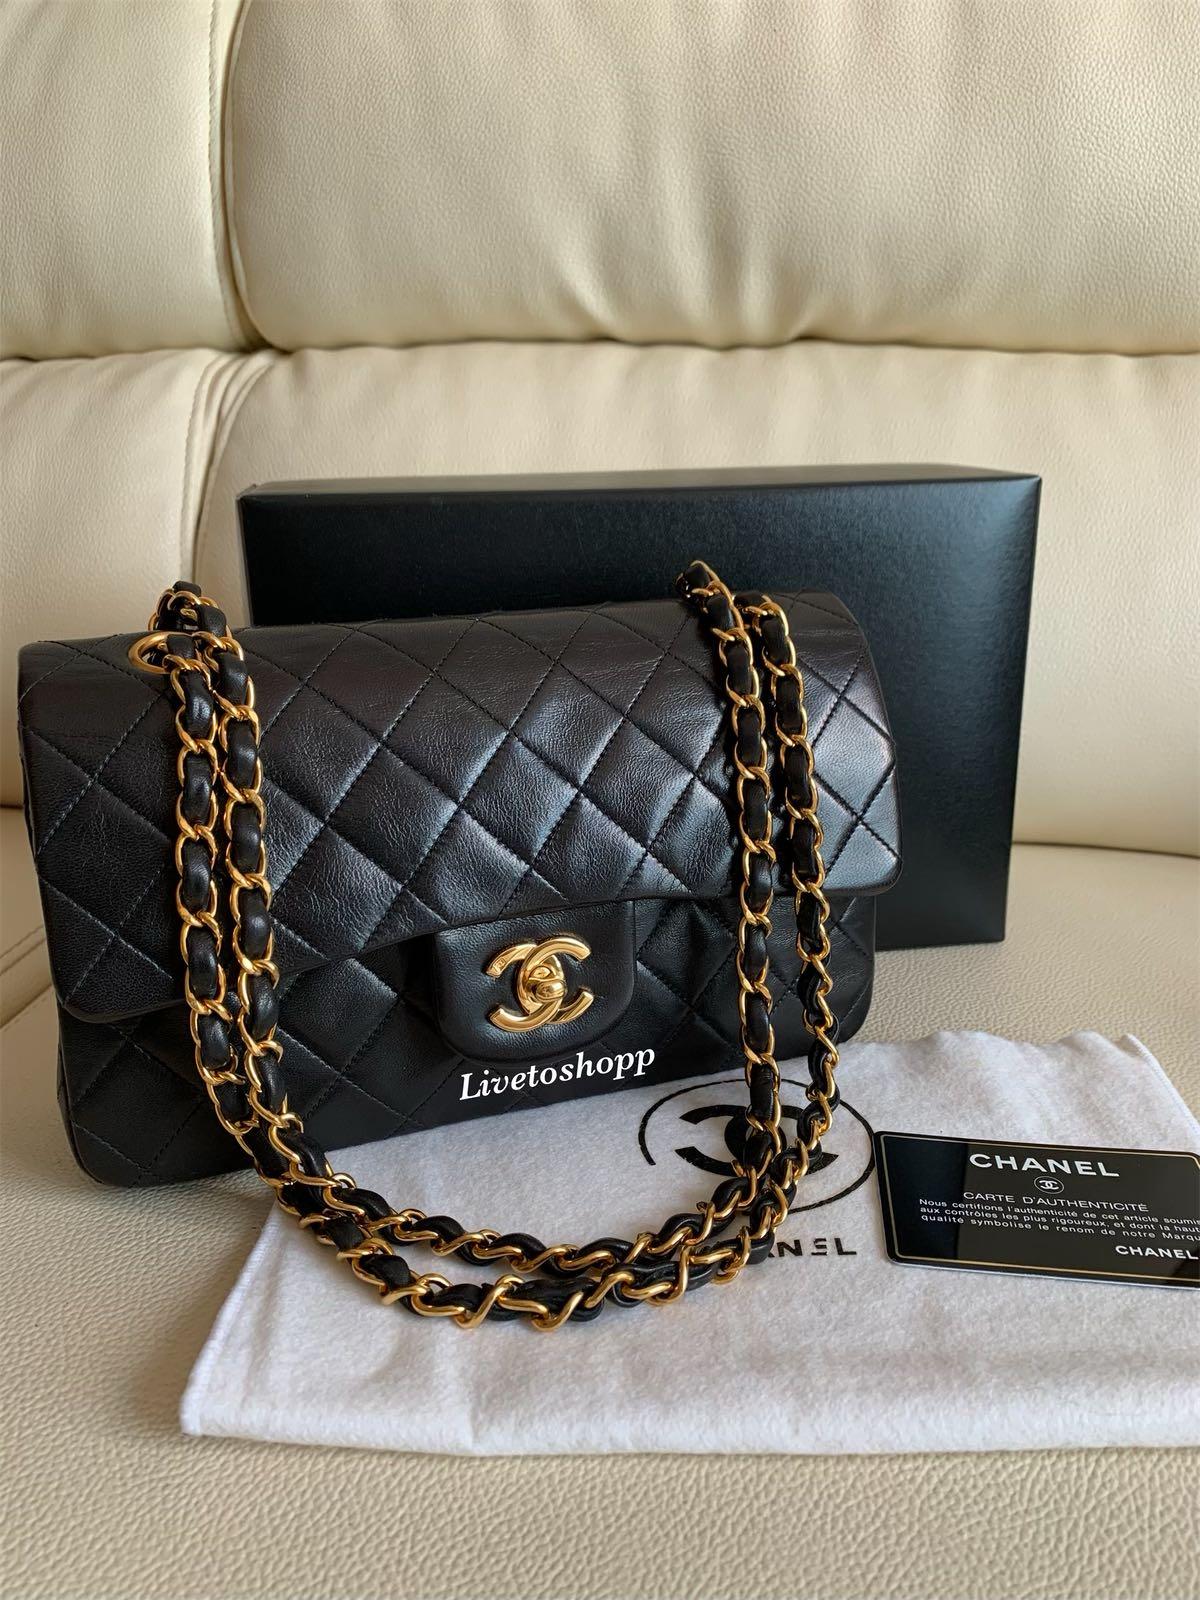 Chanel Vintage Dark Beige Small Classic Flap 24k Gold HW – CamelliaCurate